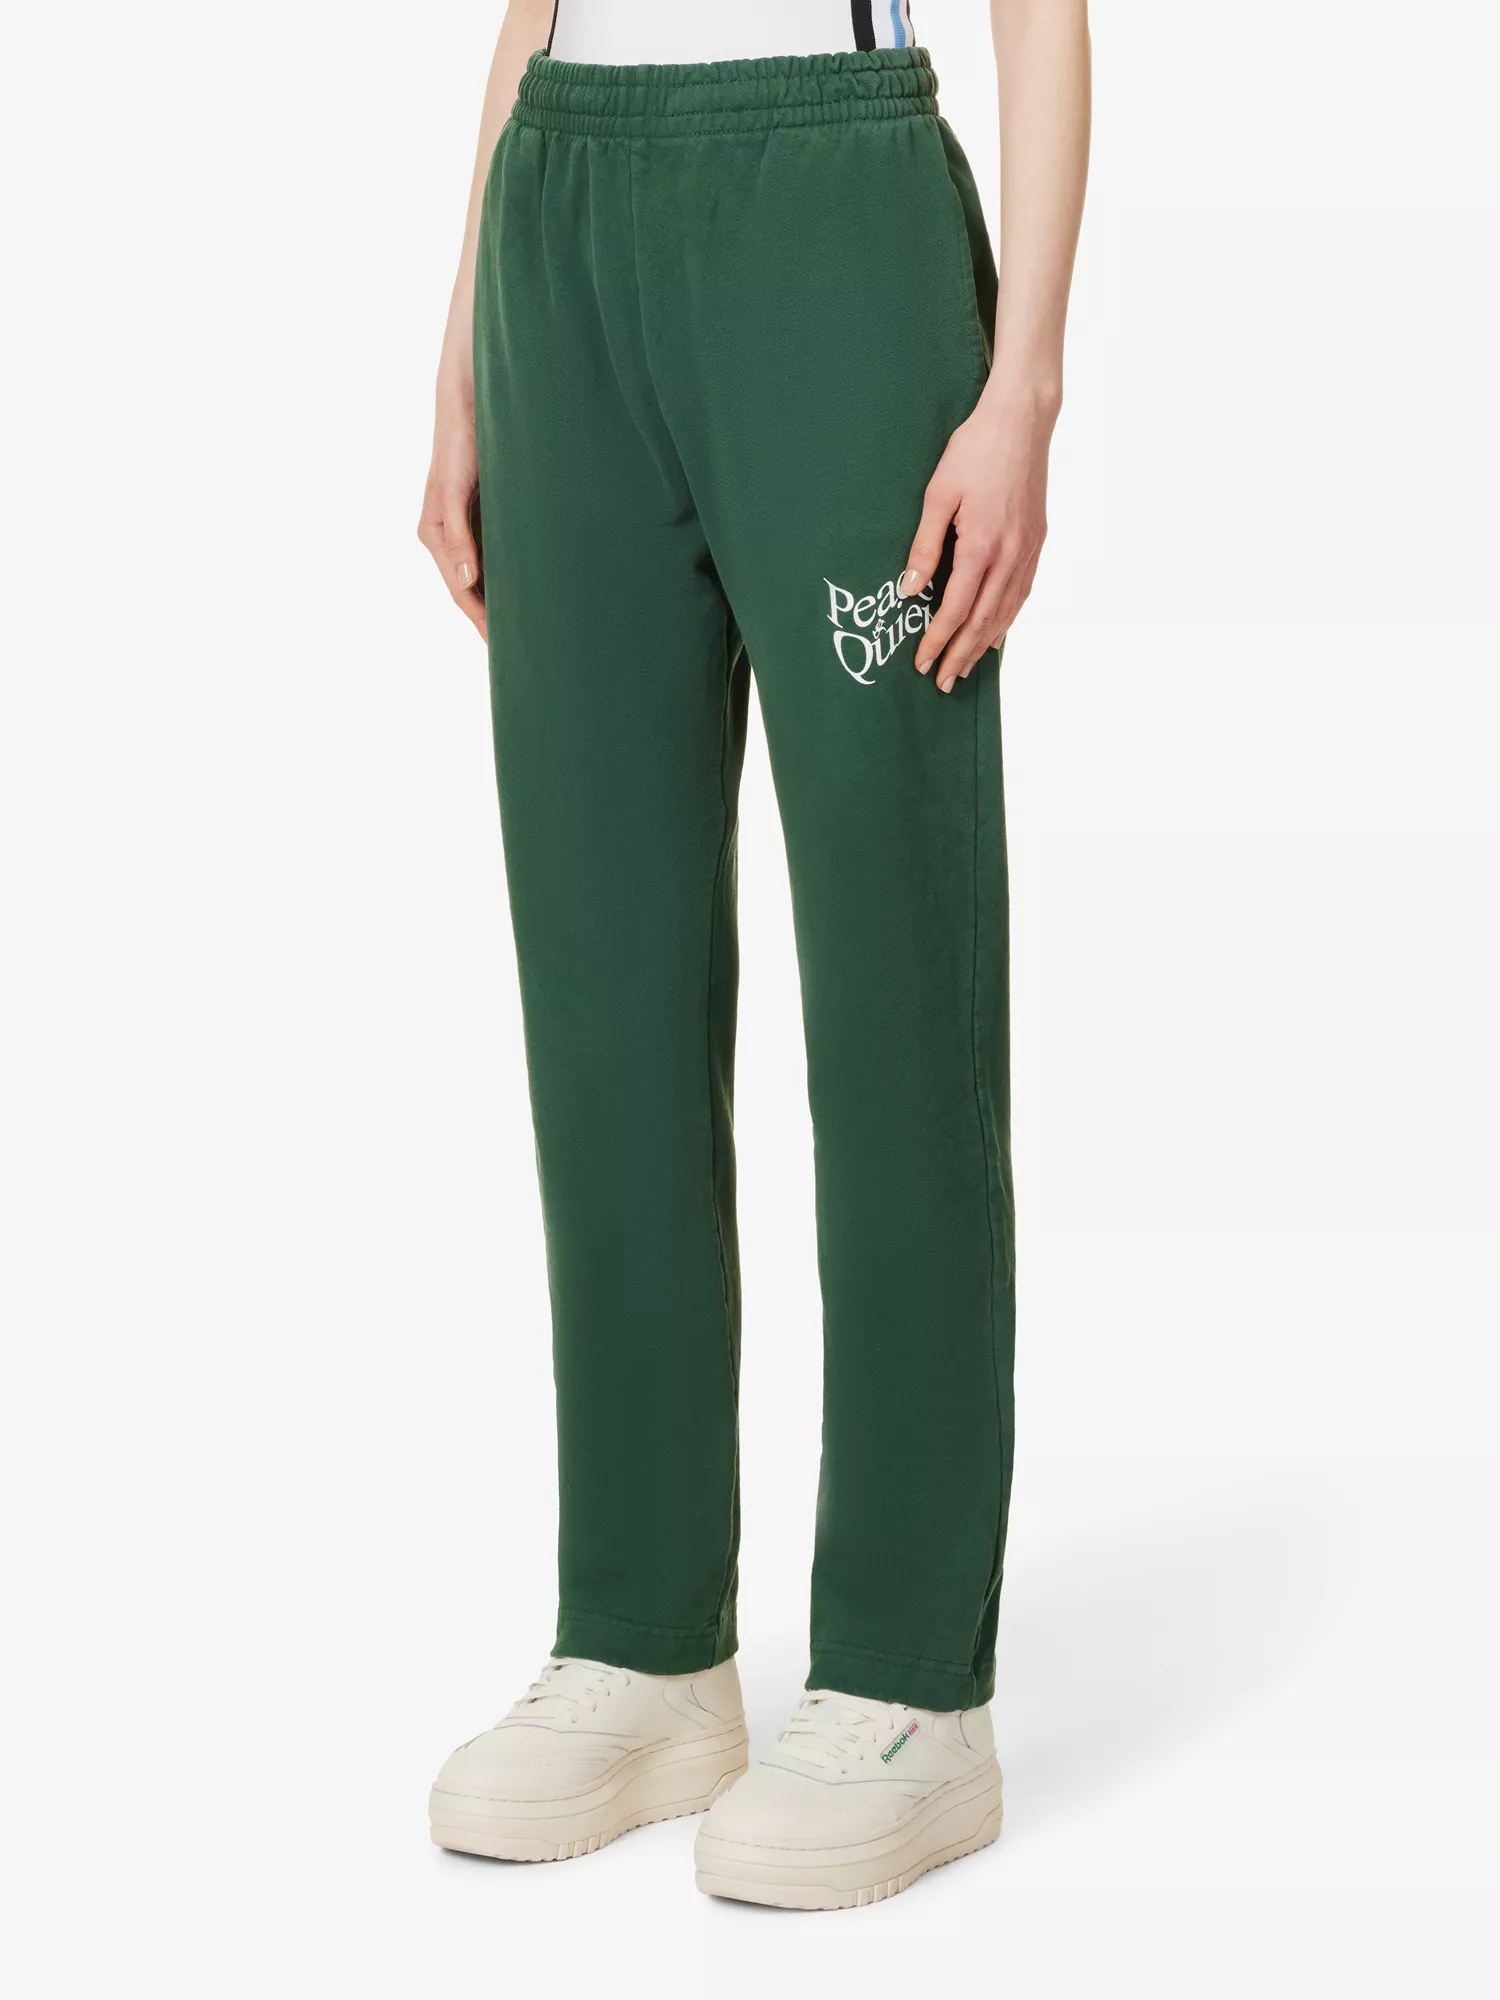 MUSEUM OF PEACE AND QUIET MUSEUM OF PEACE AND QUIET WOMEN'S FOREST WARPED LOGO LETTERING COTTON-JERSEY JOGGING BOTTOMS,63644501